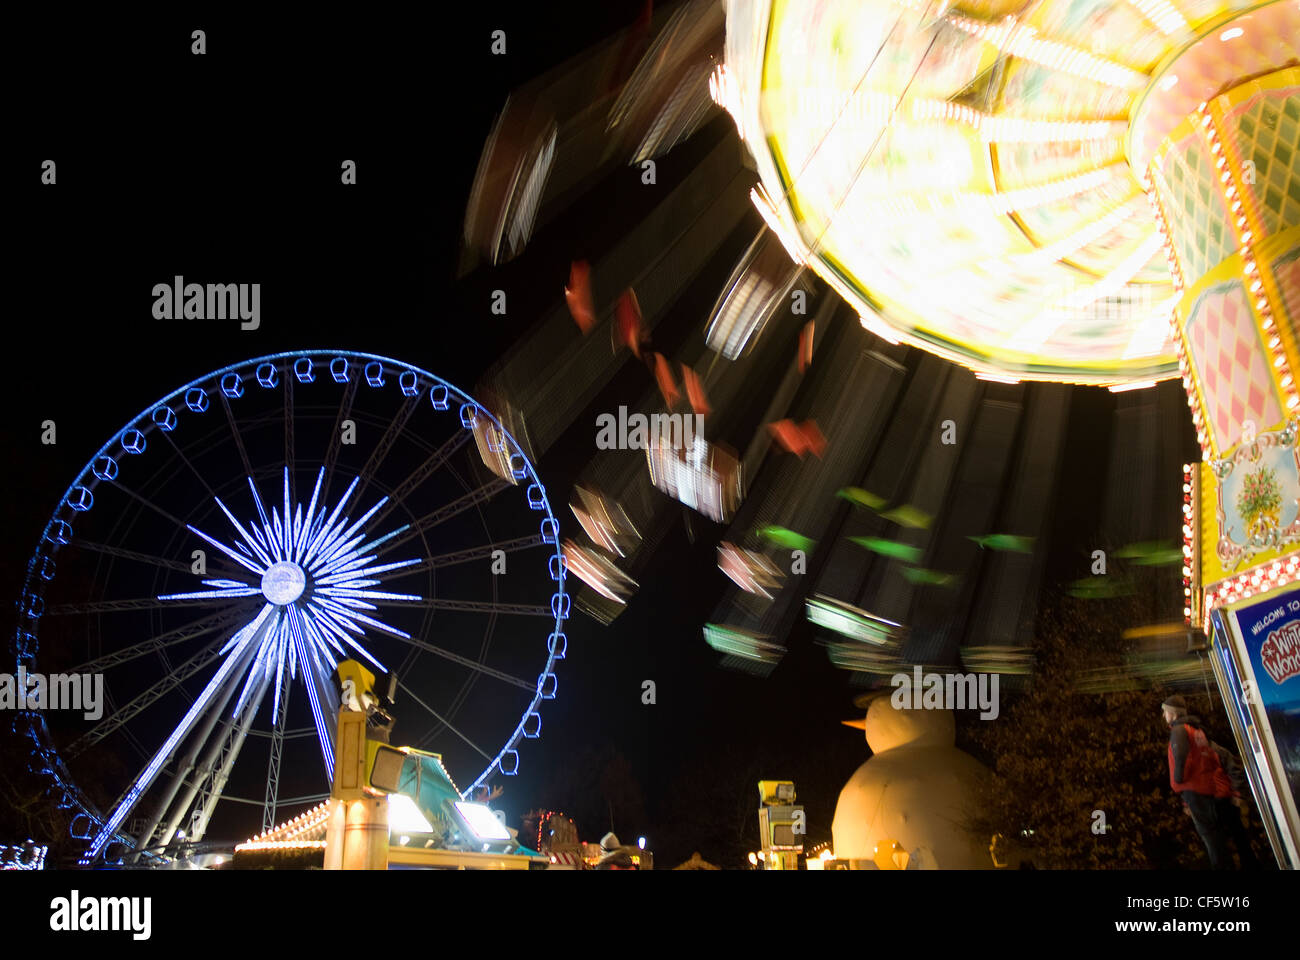 Carousel and big wheel at the Winter Wonderland in Hyde Park. Stock Photo